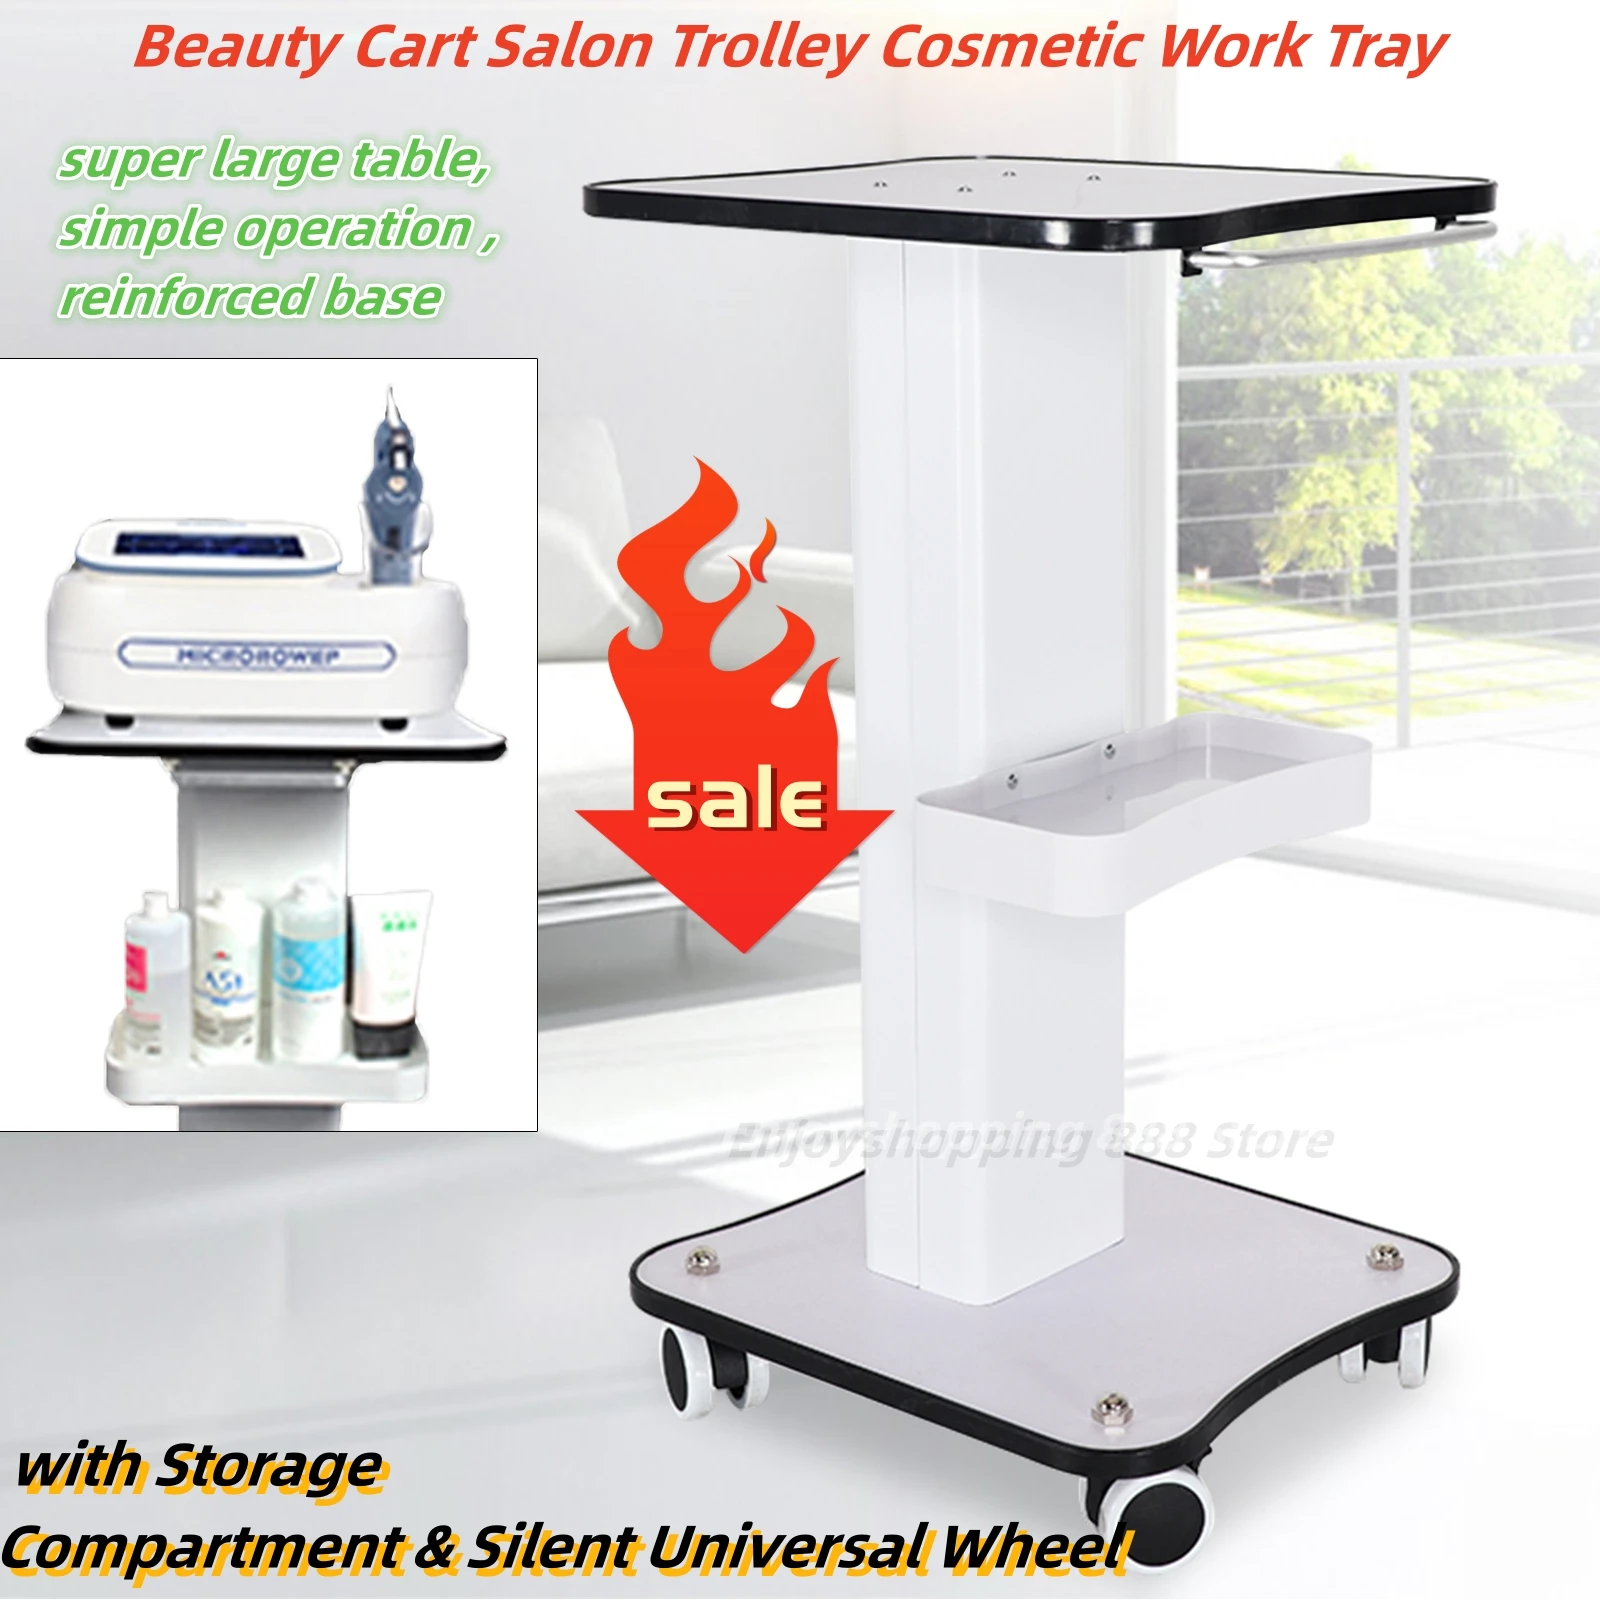 Beauty Cart Salon Trolley Cosmetic Work Tray with Storage Compartment & Silent Universal Wheel 4 pcs lot 3 inch screw m8 universal pp wheel brake dining wheel casters trolley silent wheels furniture wheels